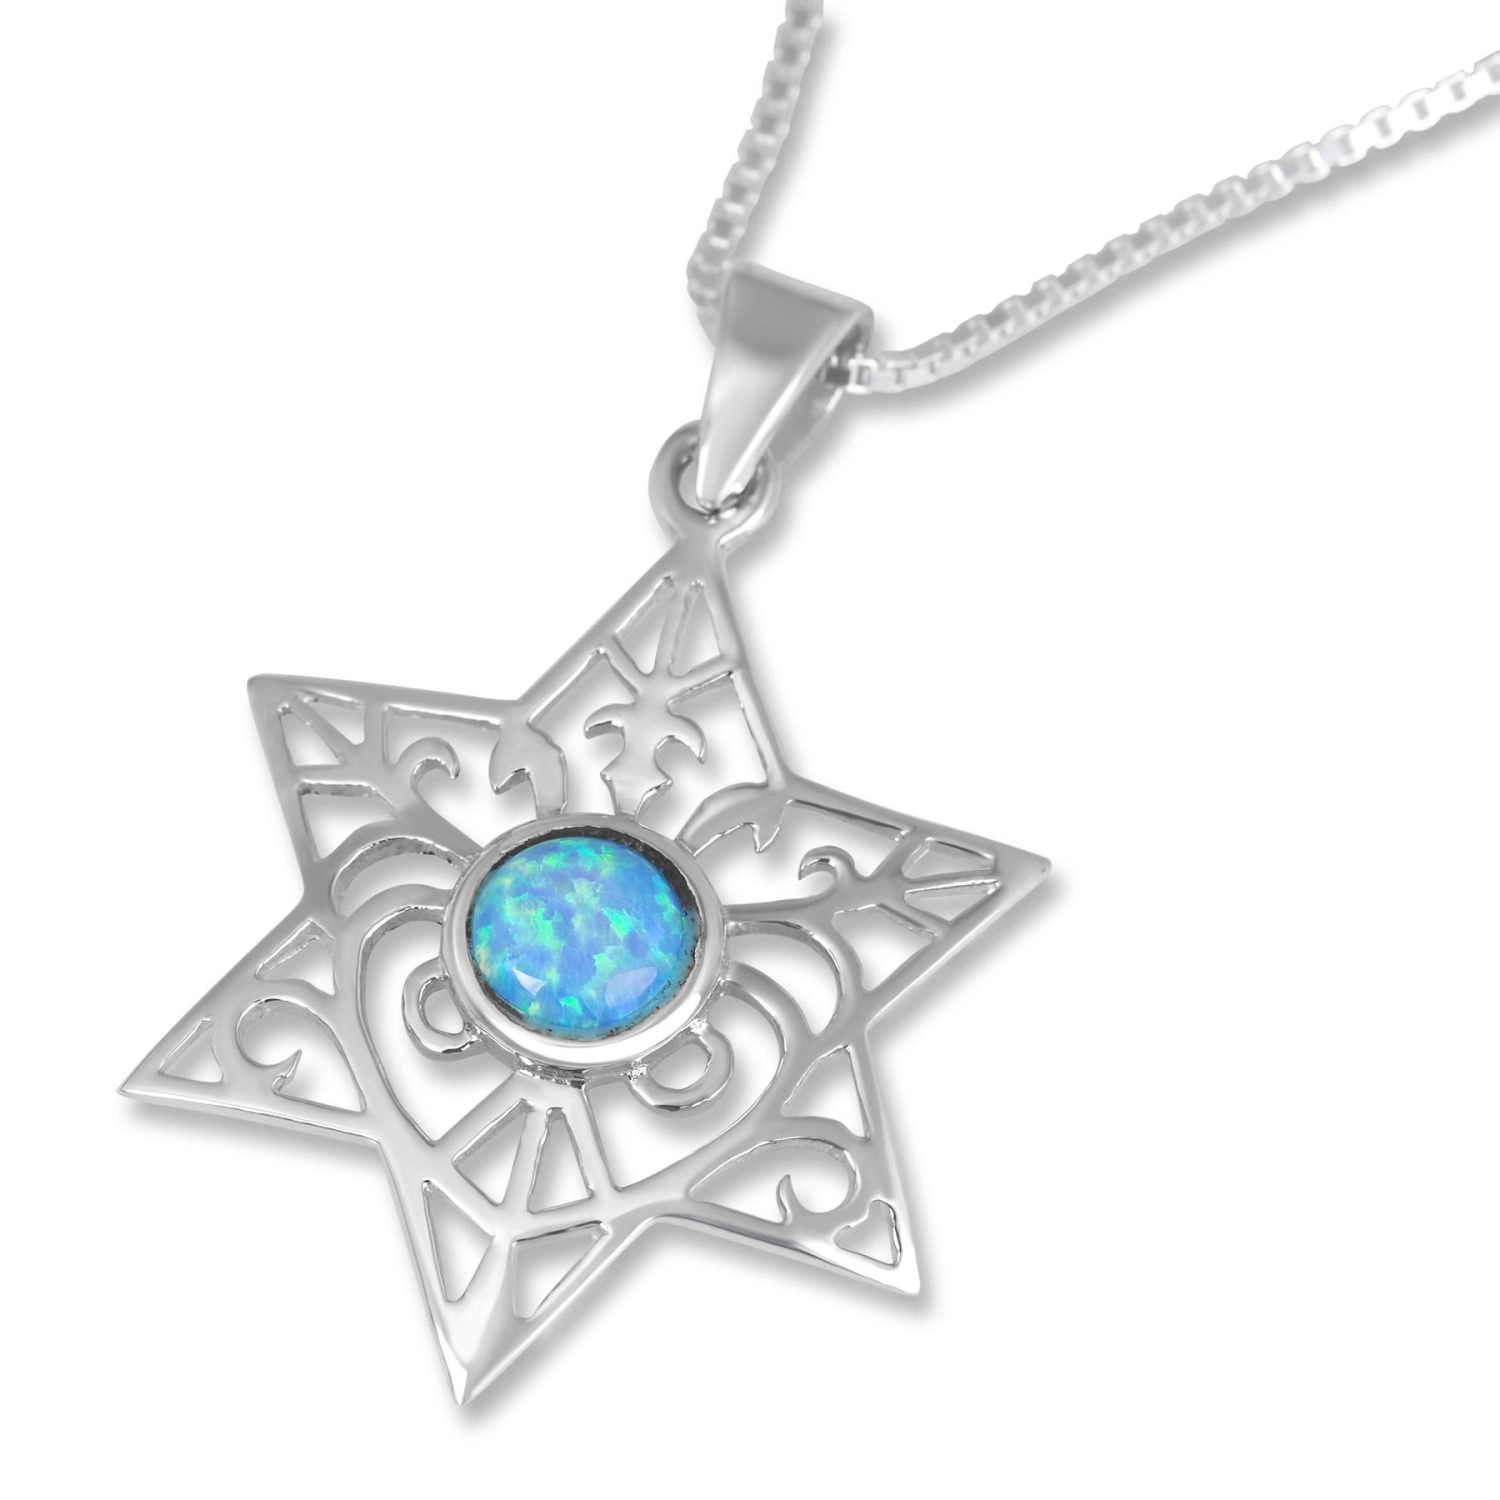 Sterling Silver Filigree Star of David Necklace with Opal Center - 2